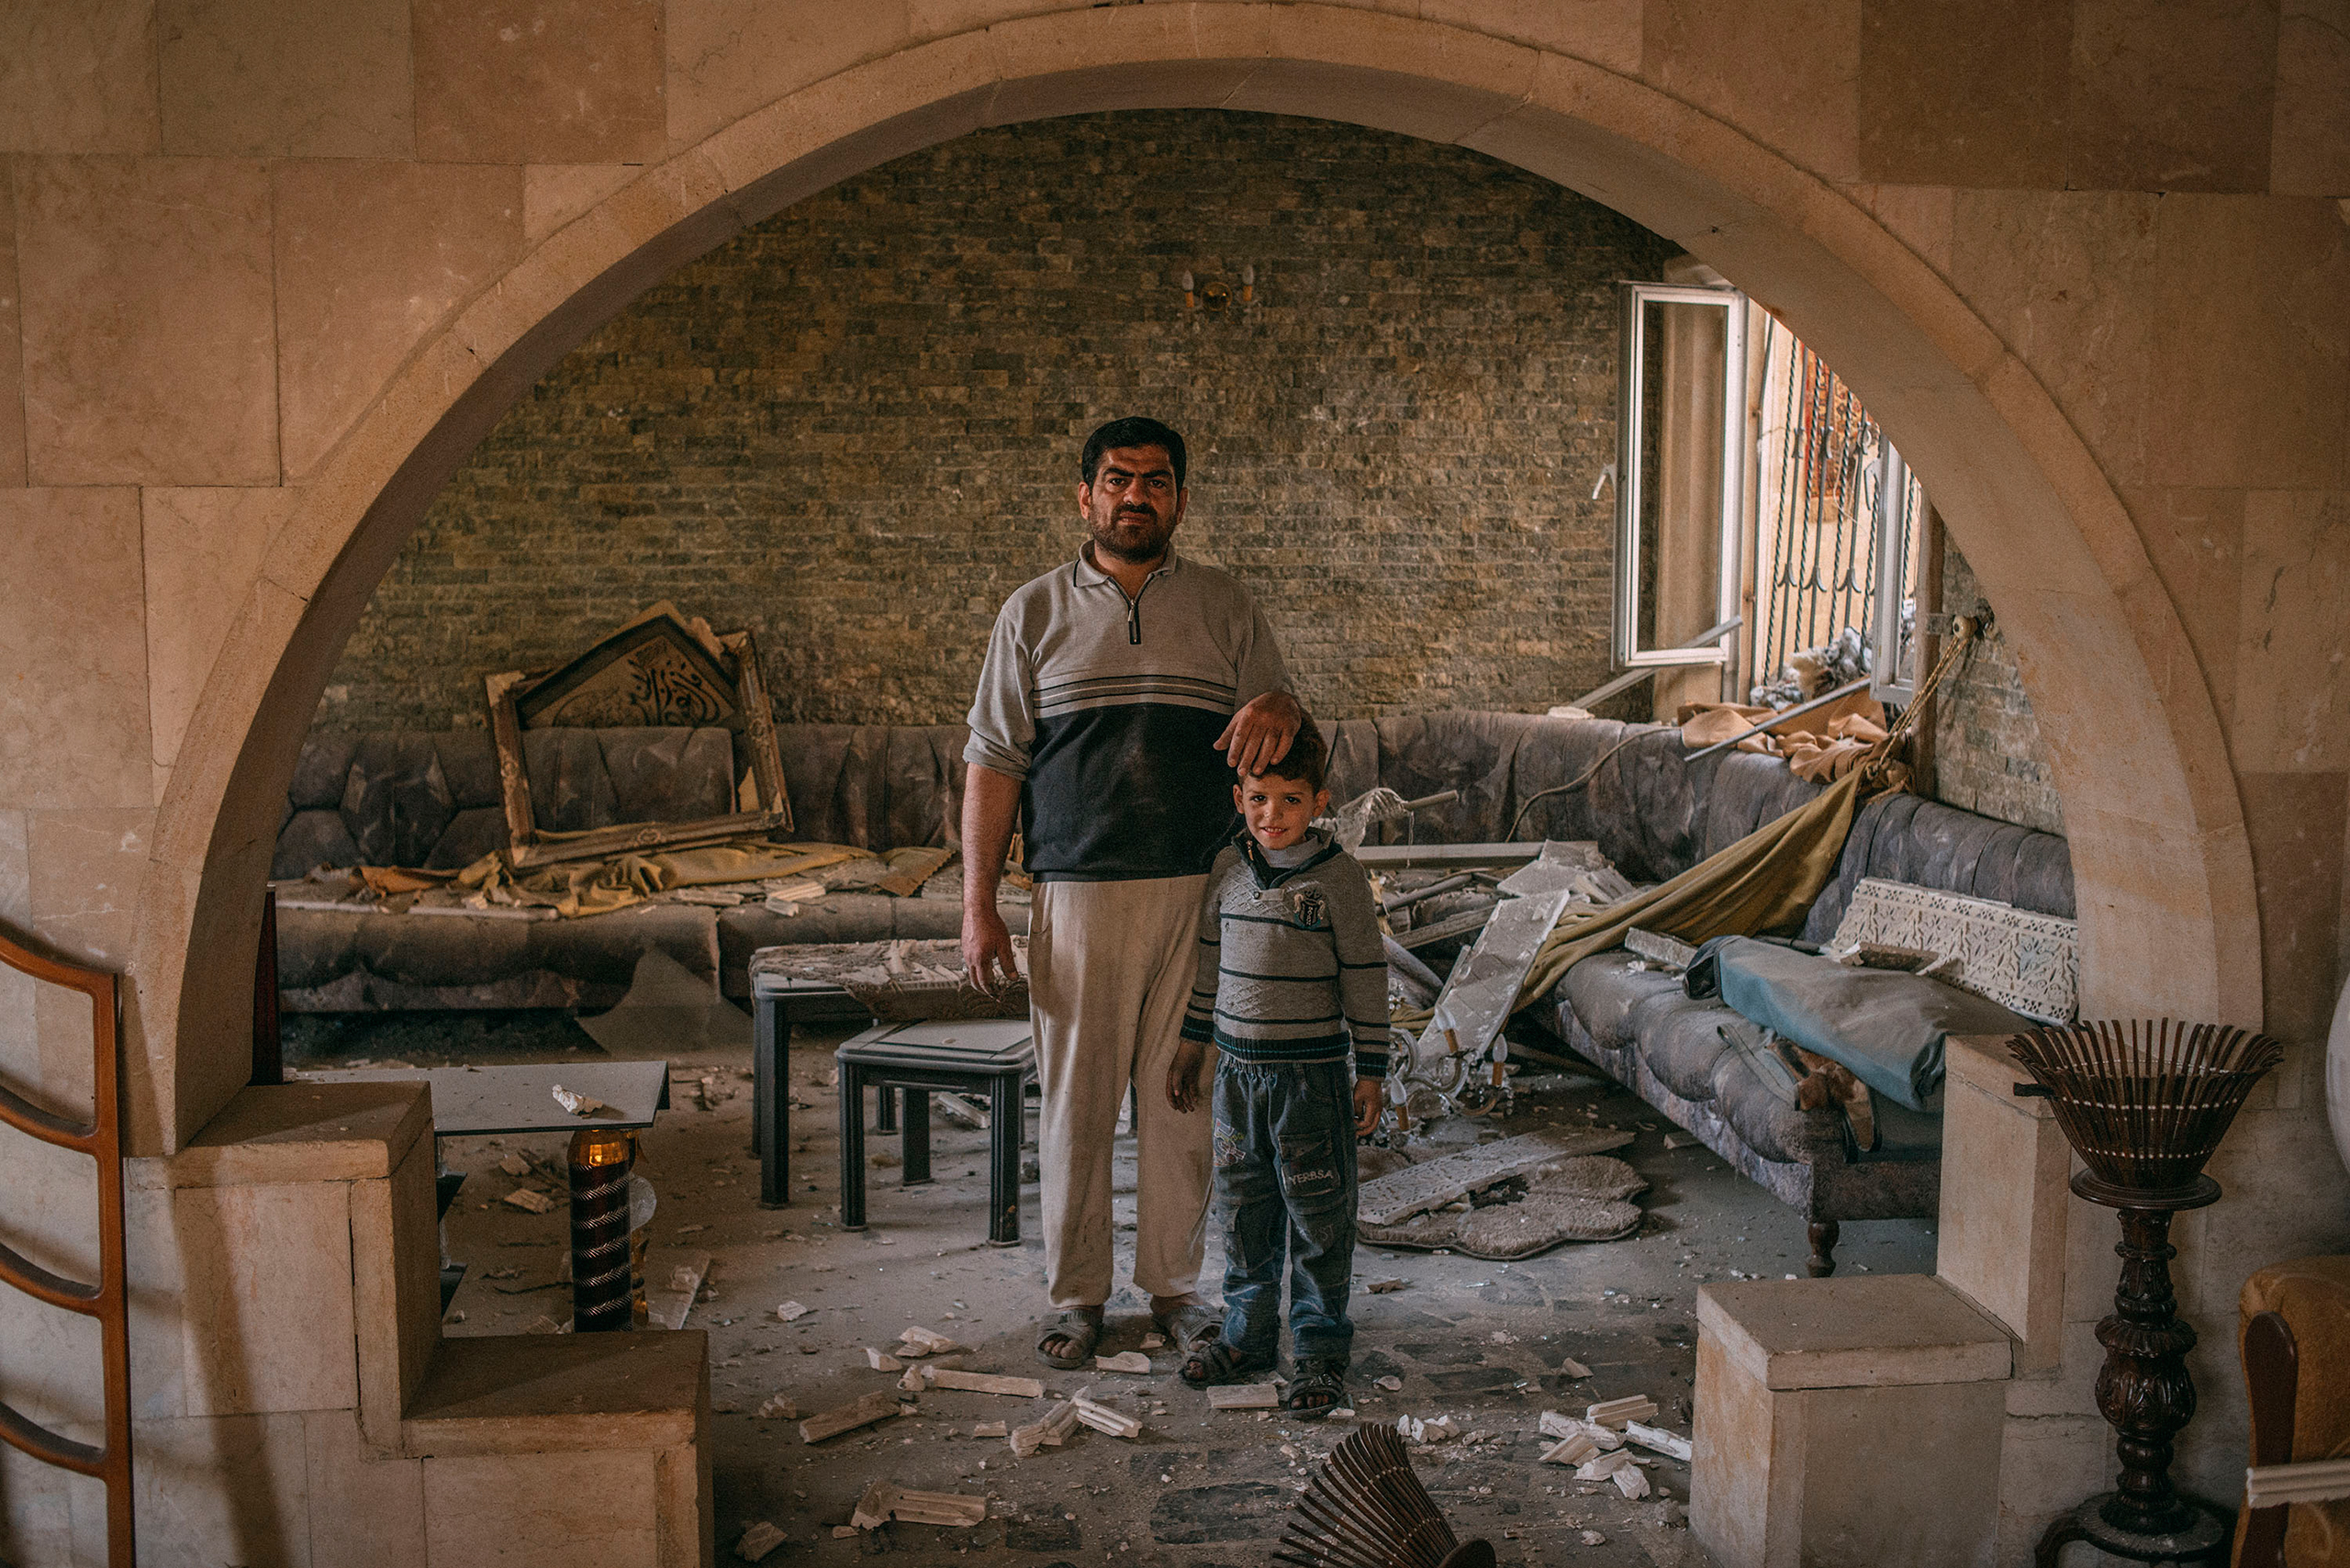 Median Hikmat al-Galou with his son inside their home that was ravaged in February during fighting between Iraqi forces and ISIS in southwest Mosul on March 29, 2017. (Emanuele Satolli for TIME)